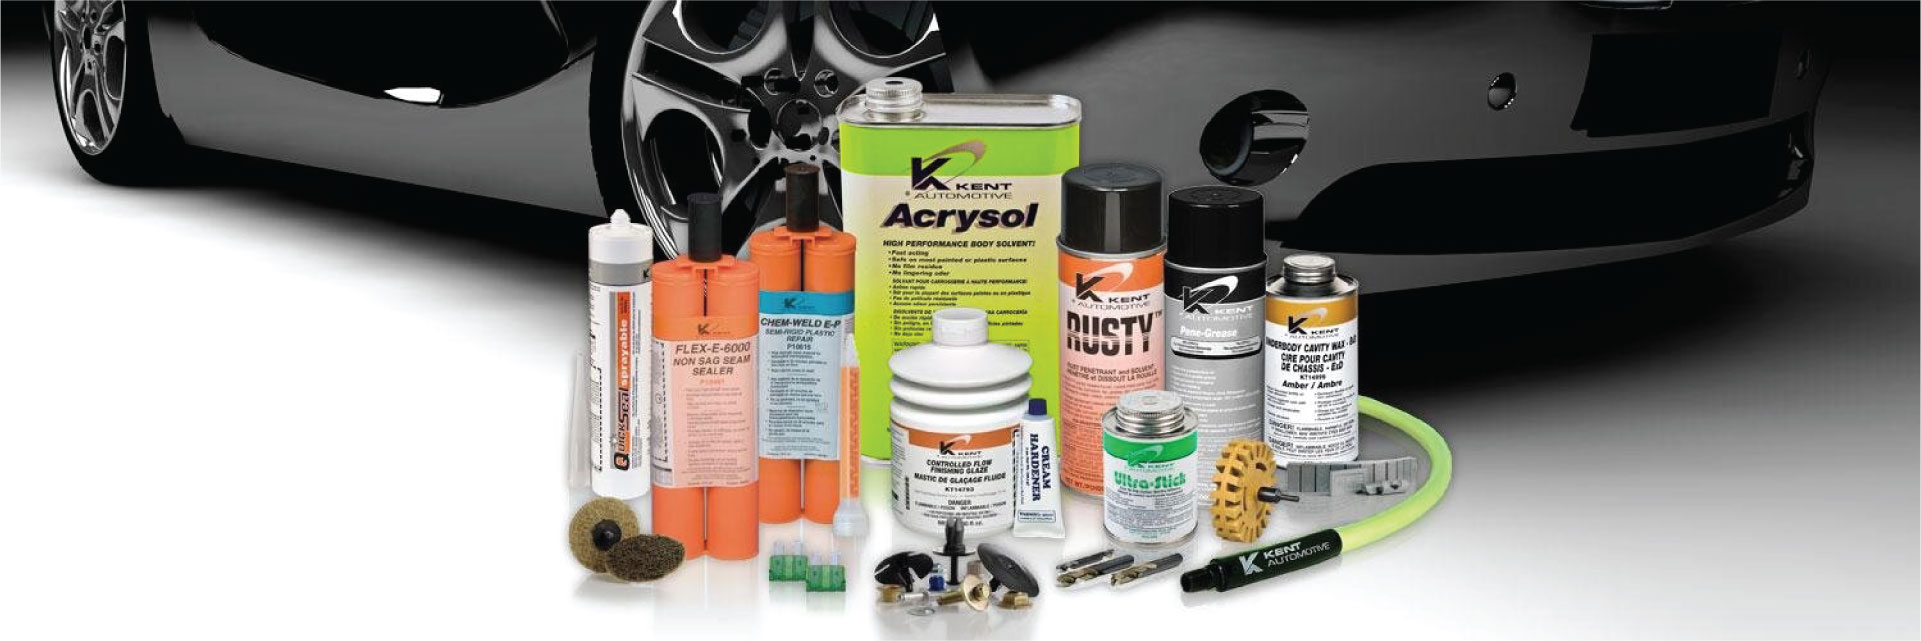 OEM-Quality Products - Time-Tested, Proven To Perform.